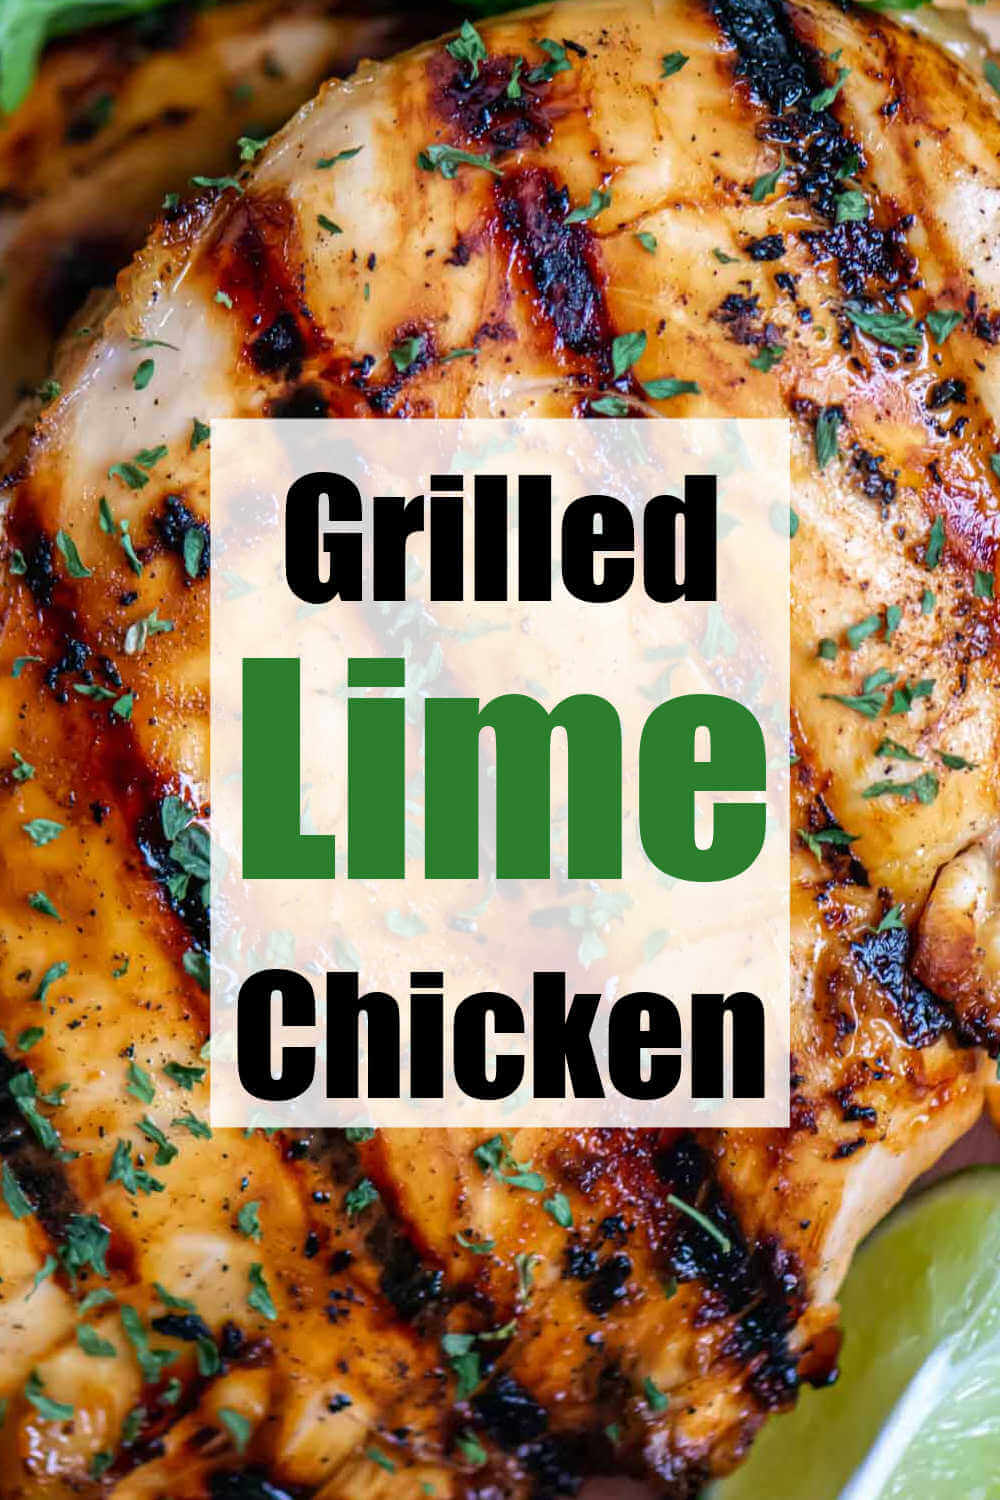 Grilled Lime Chicken Recipe